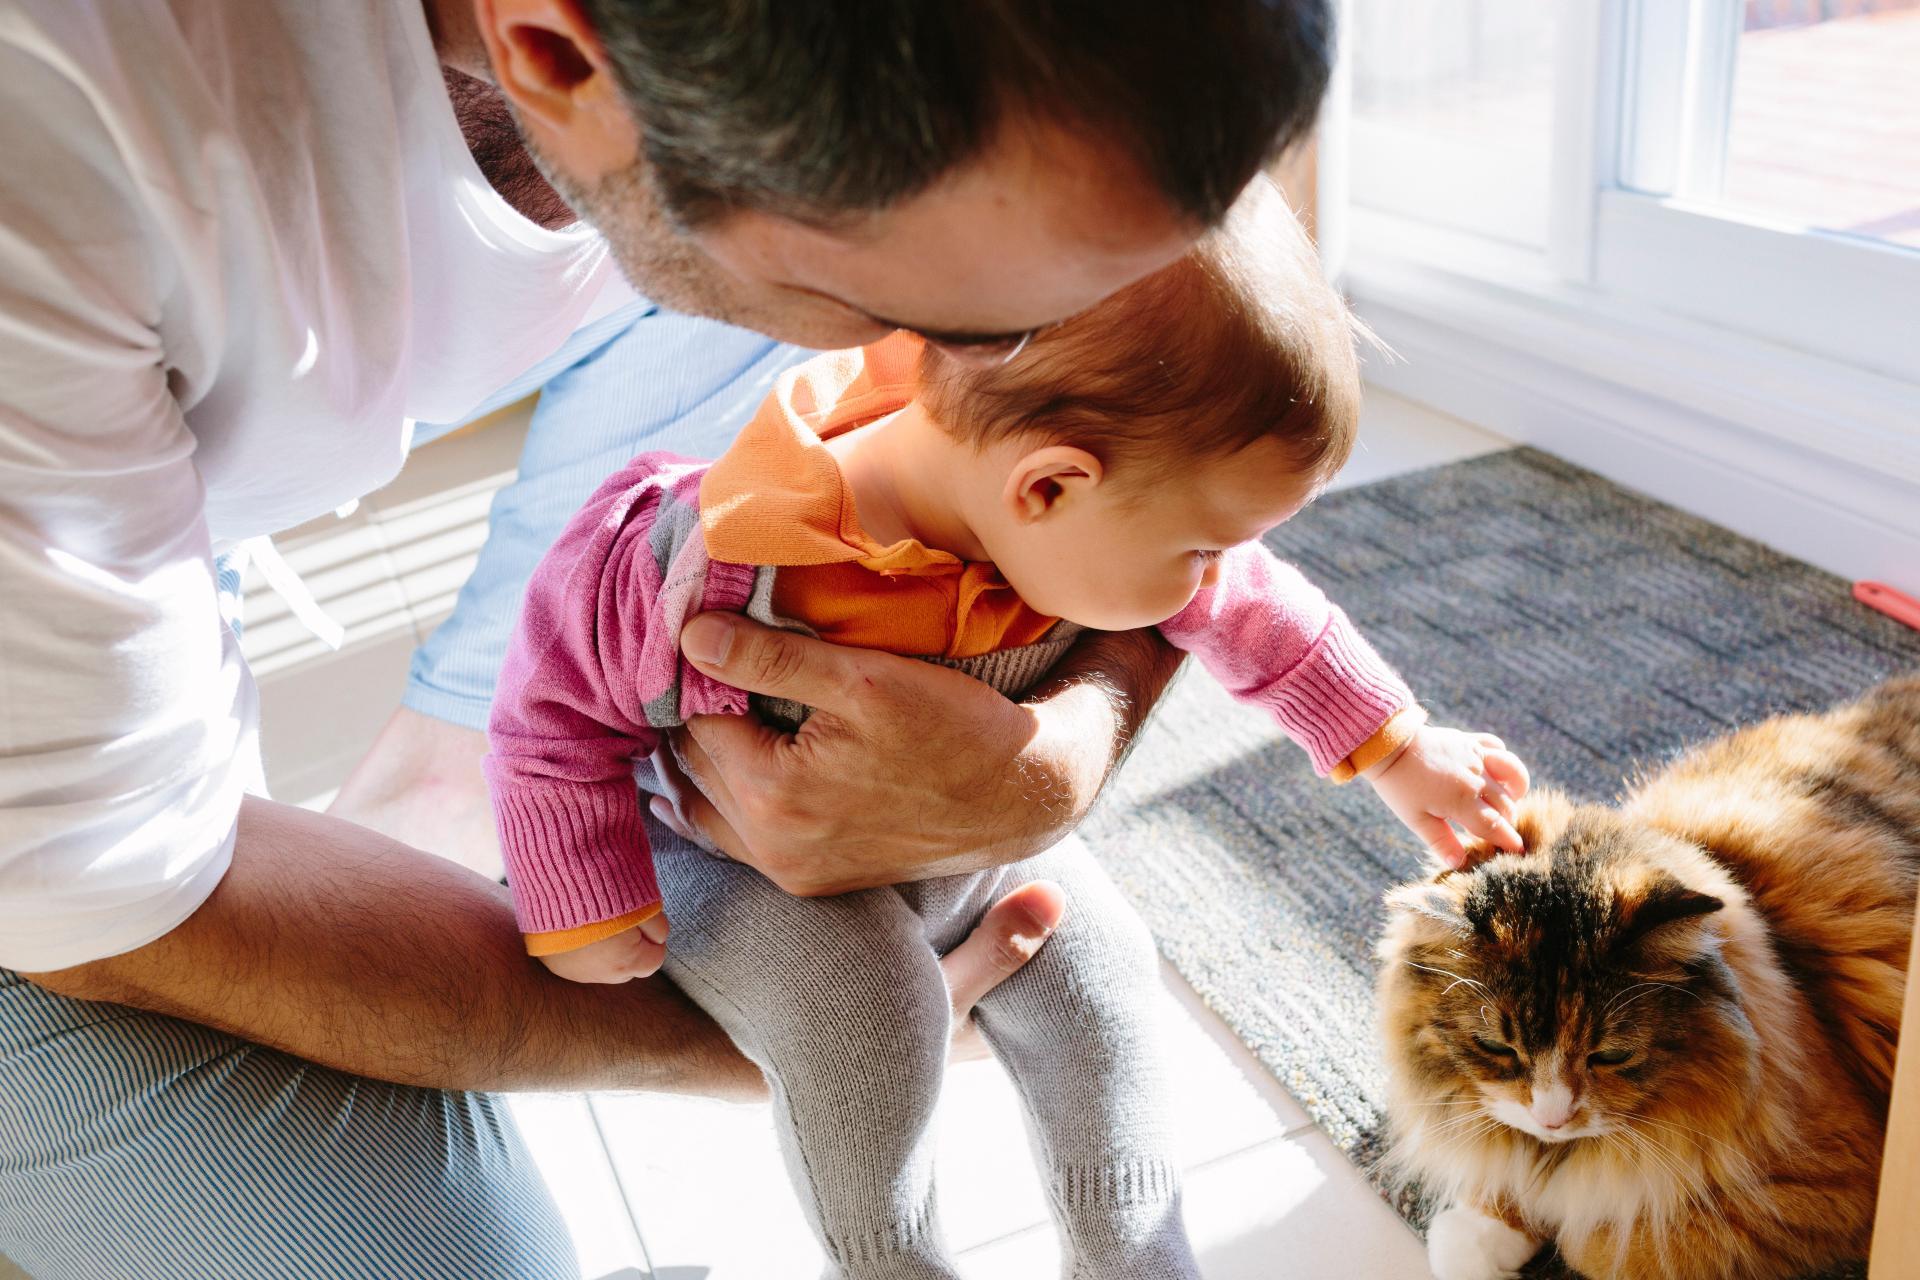 A dad holding a baby so she can pet a cat